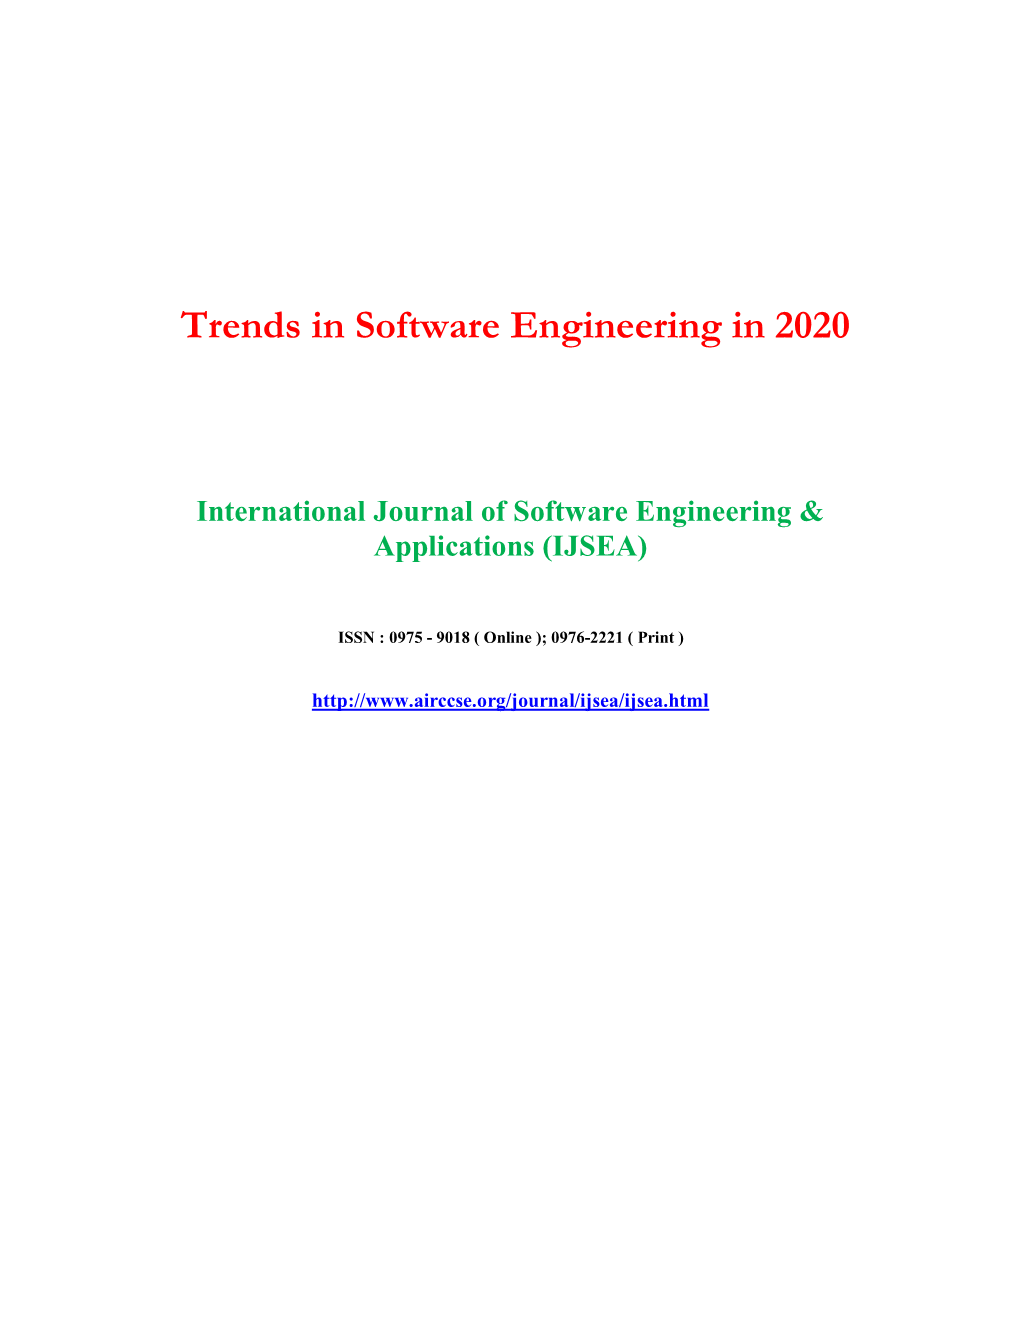 Trends in Software Engineering in 2020 (Pdf)